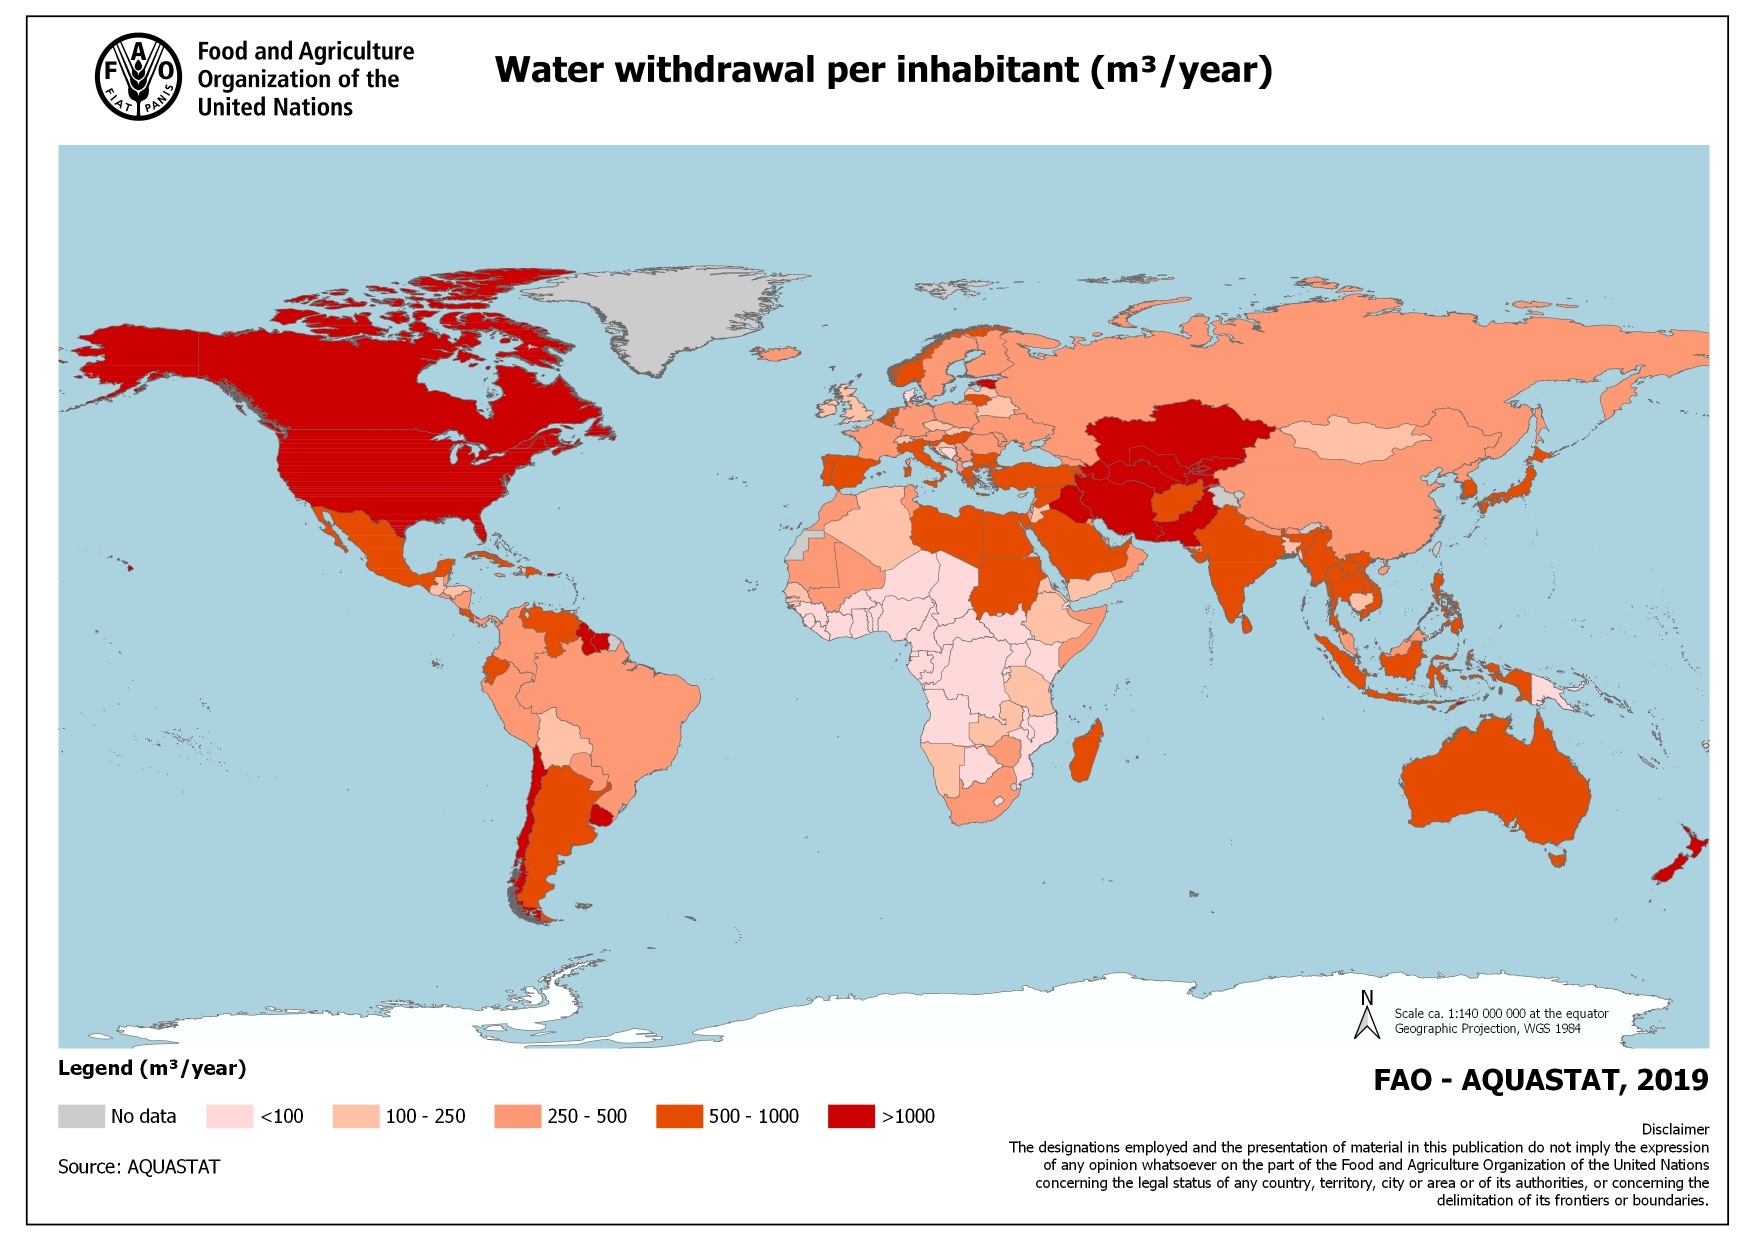 Water withdrawals, or water abstractions, are defined as freshwater taken from ground or surface water sources, either permanently or temporarily, and conveyed to a place of use (credits: FAO - Aquastat 2019)